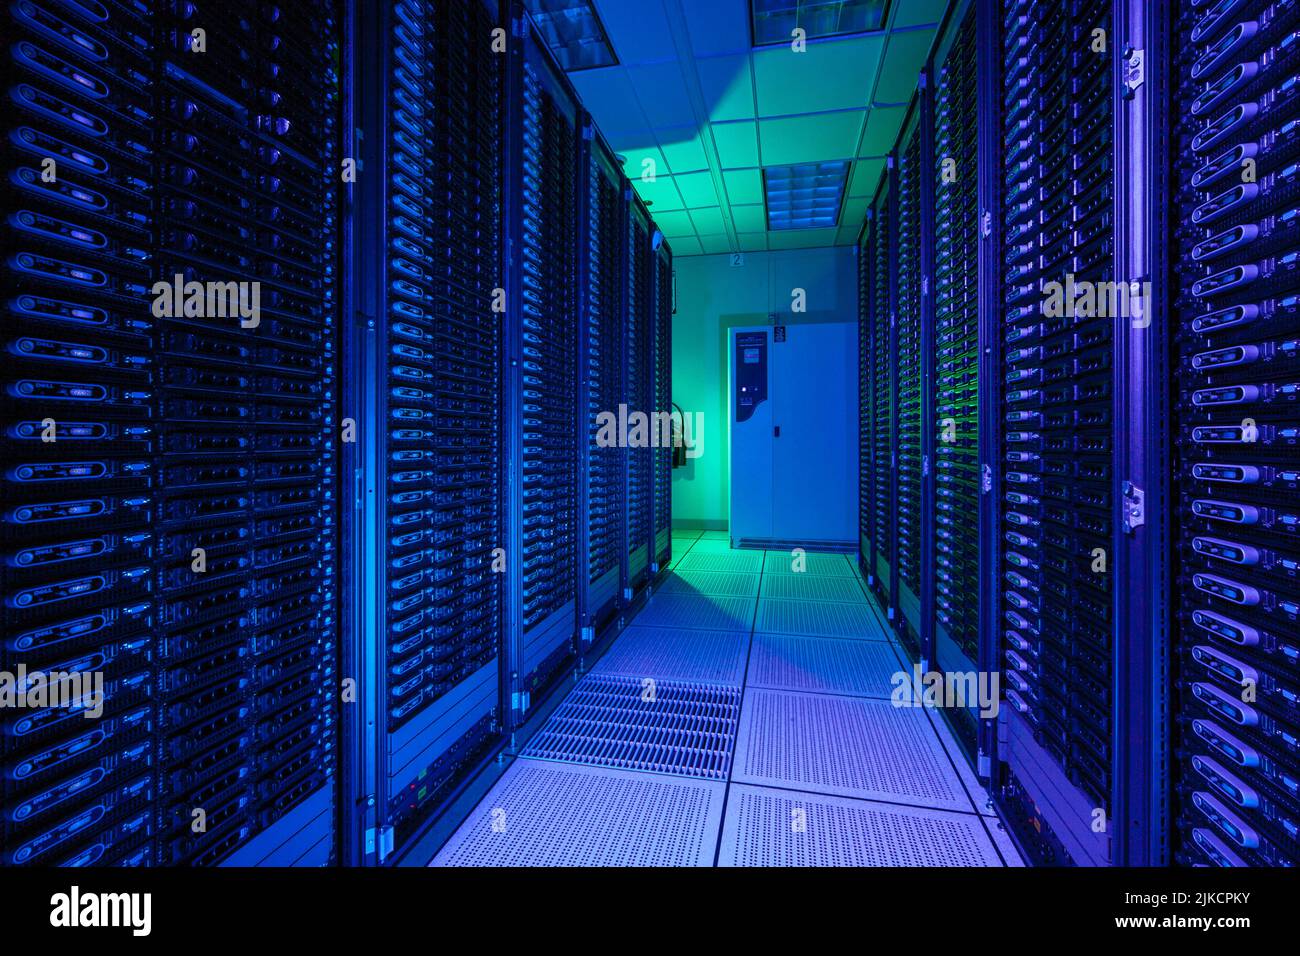 Computing facility in Texas with blue light Stock Photo